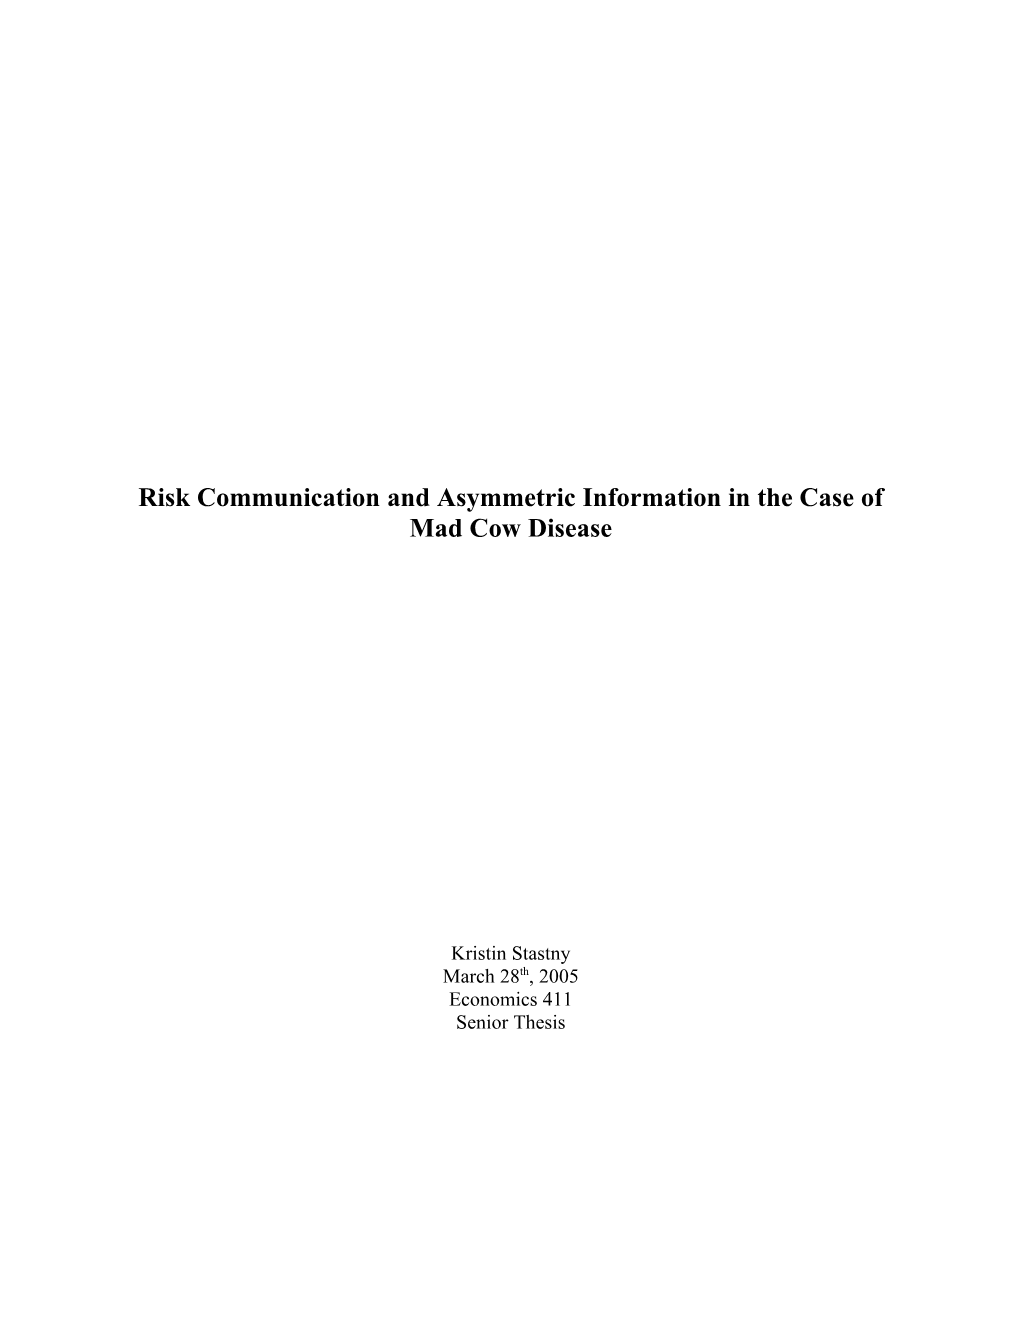 Risk Communication and Asymmetric Information in the Case of Mad Cow Disease